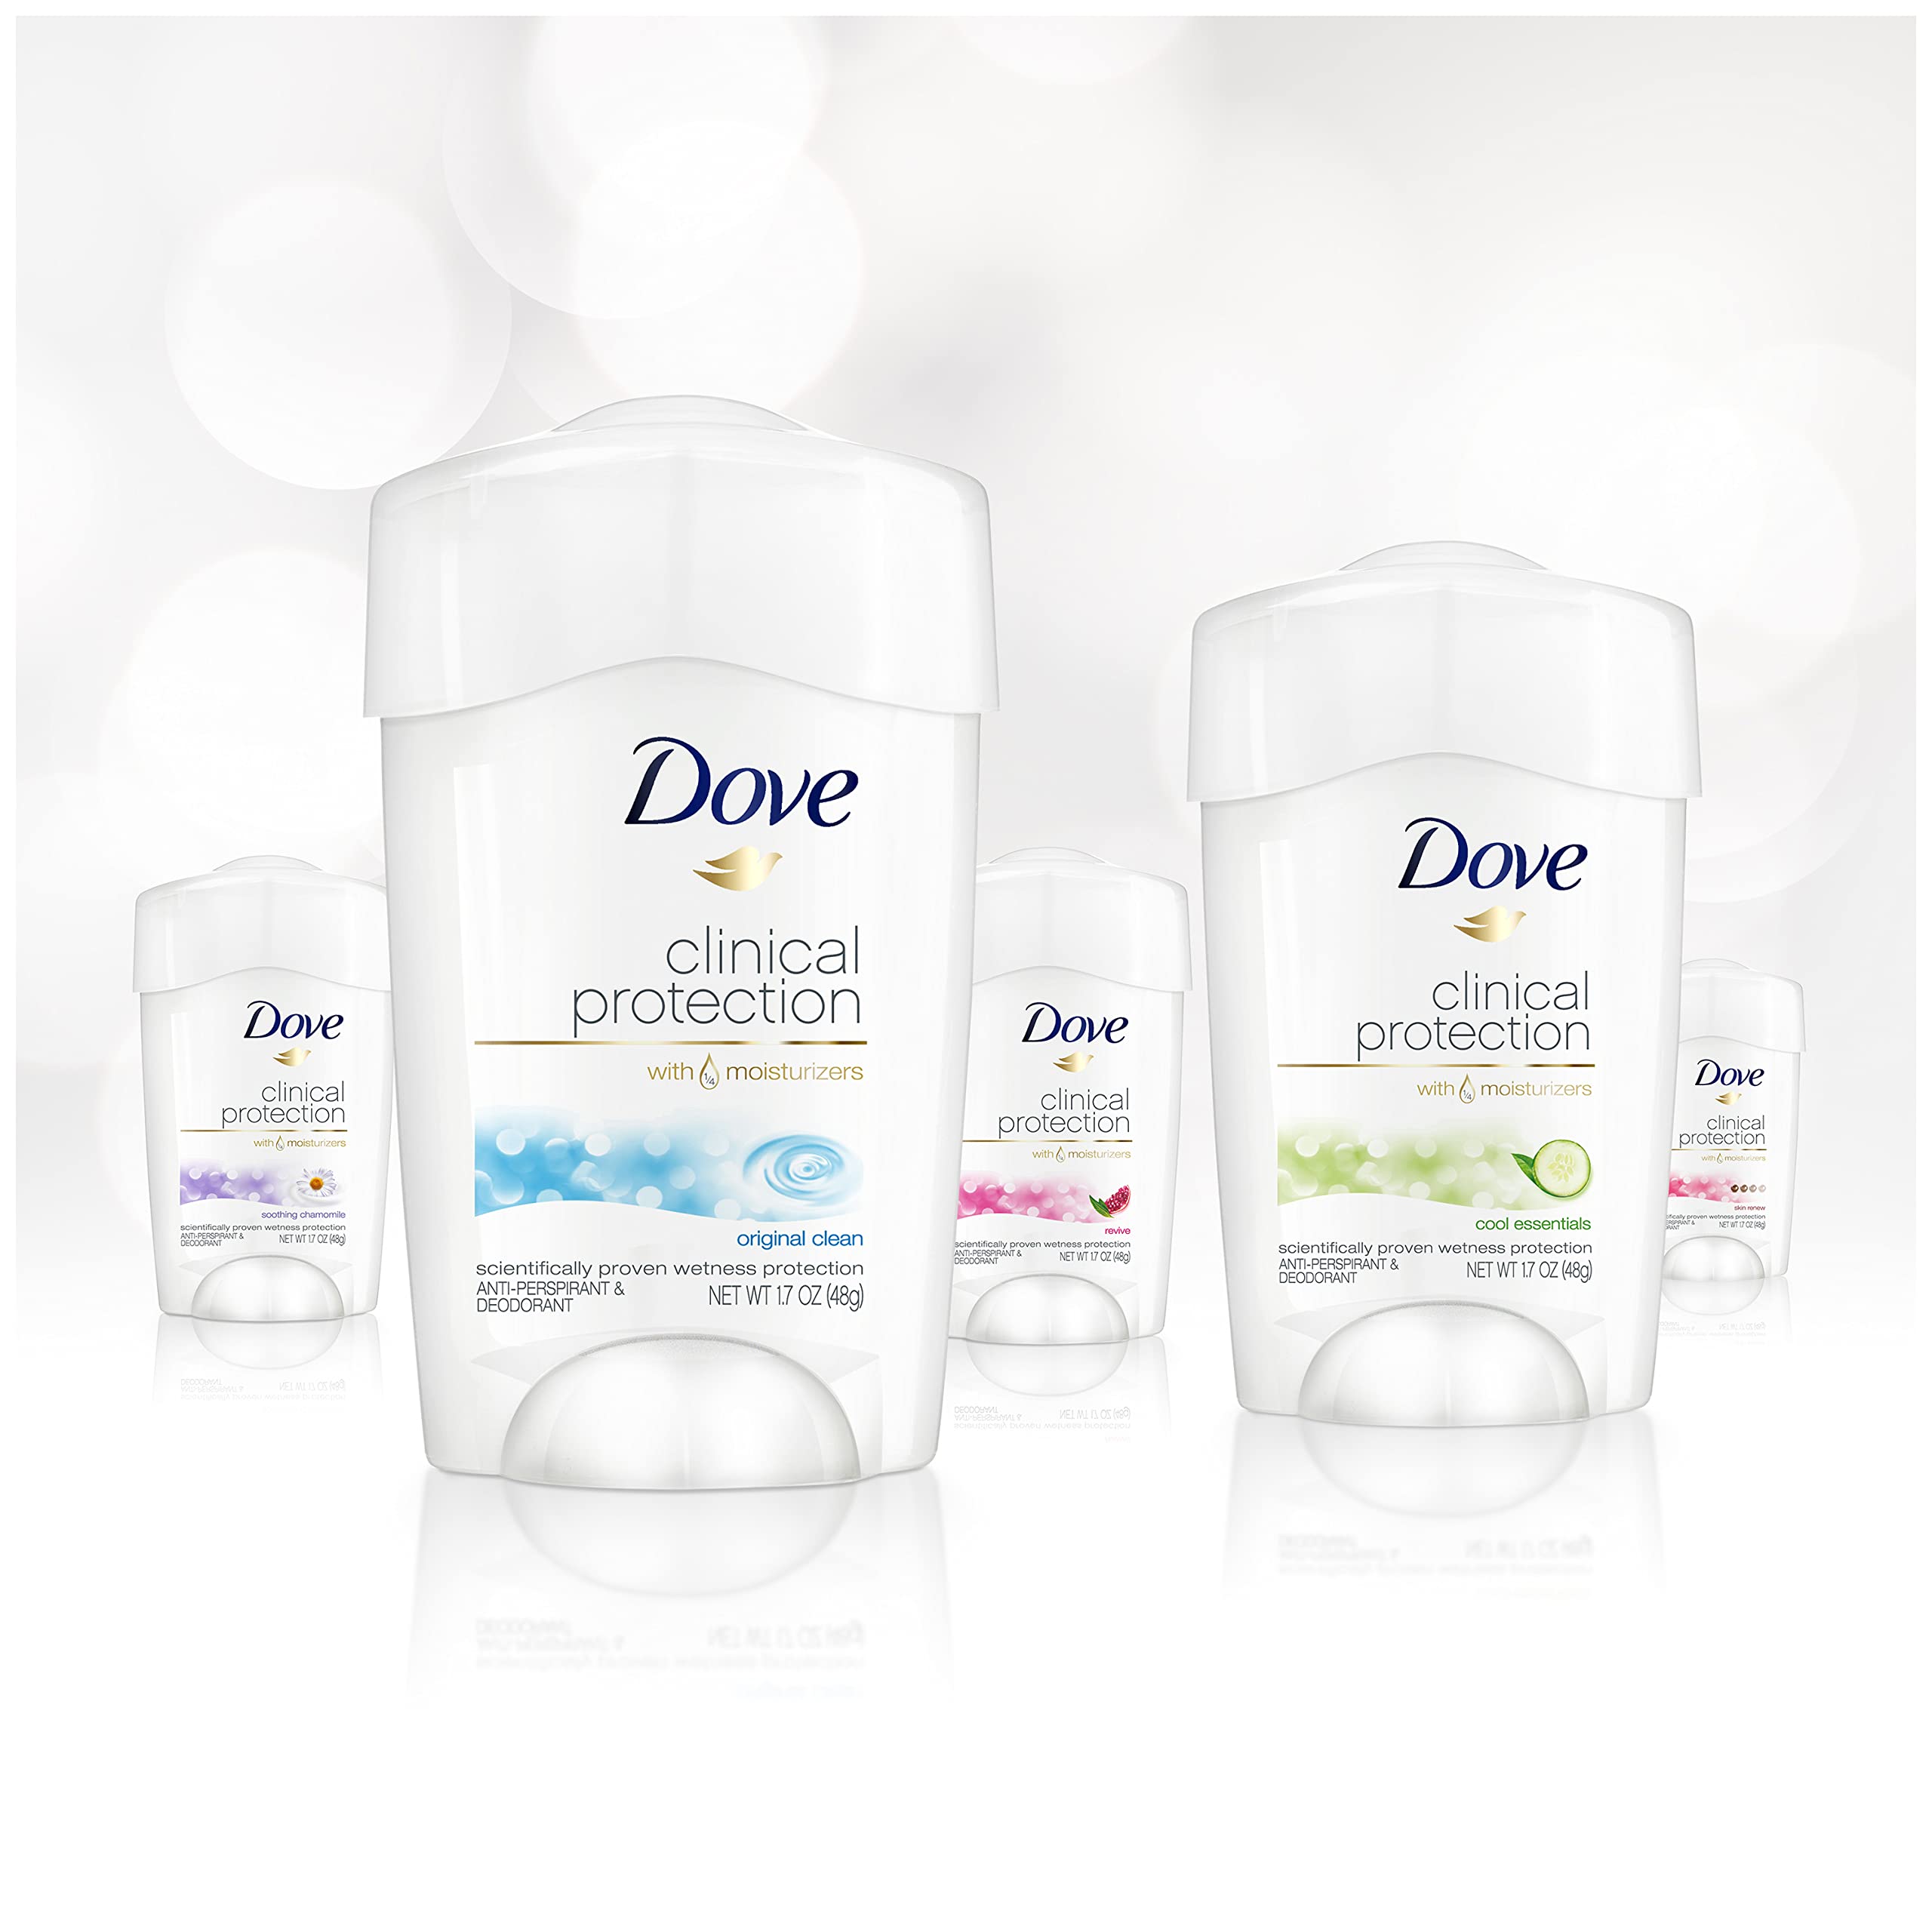 Dove Clinical Protection Antiperspirant Deodorant For Sweat and Odor Protection Original Clean Antiperspirant For Women Made With 1/4 Moisturizers 1.7 oz